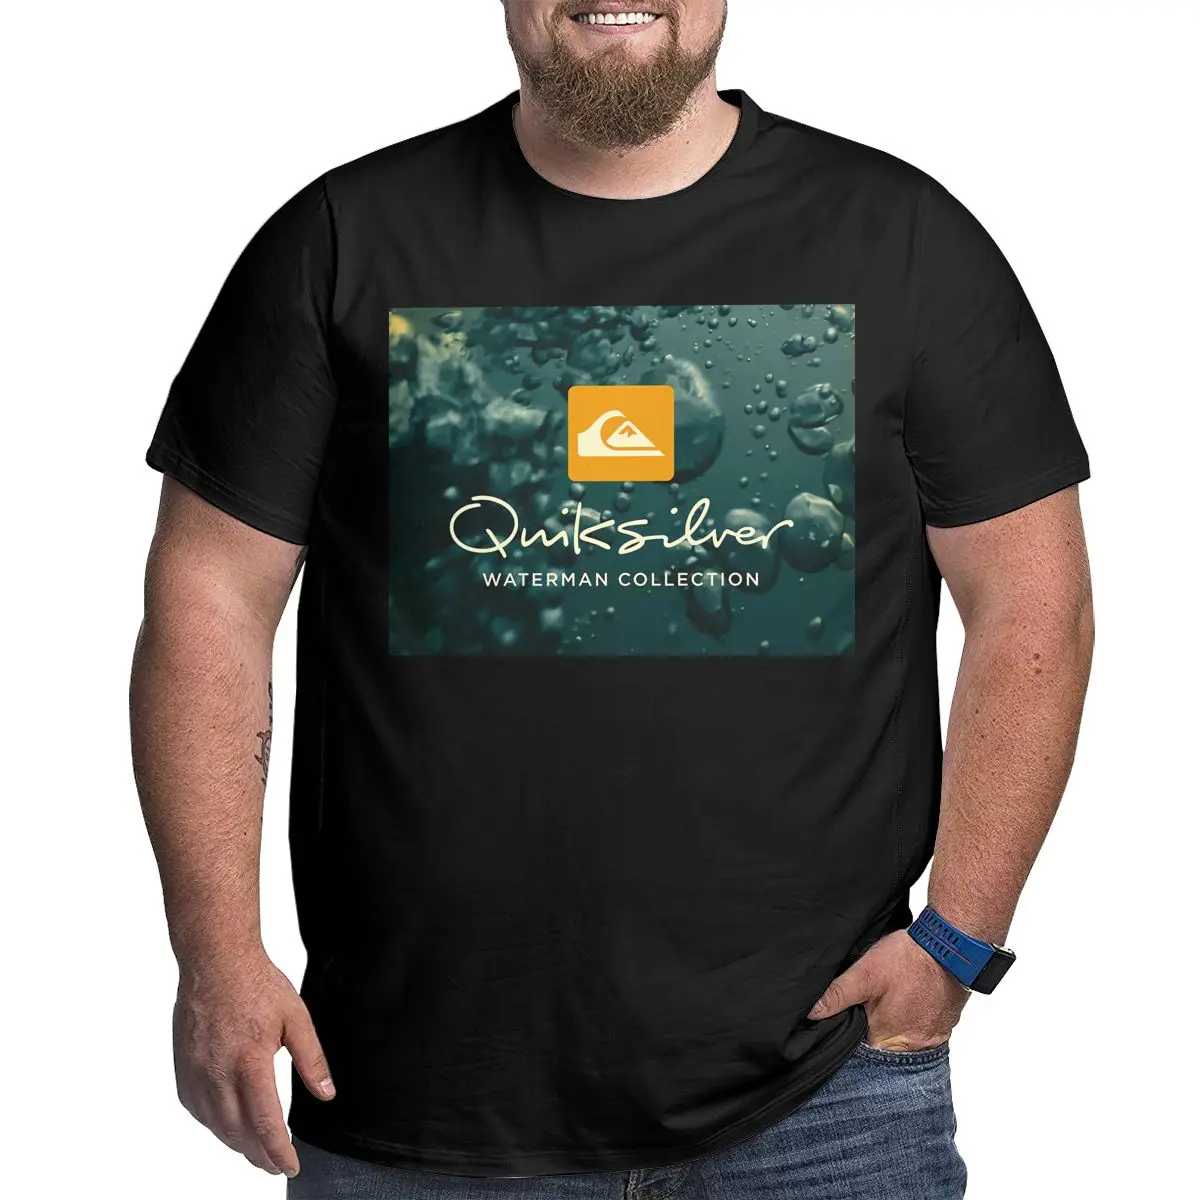 

Quiksilver Waterman Collection Men T Shirts Plus Size Oversized Cotton T-shirts for Big Man Summer Short Sleeves Tops